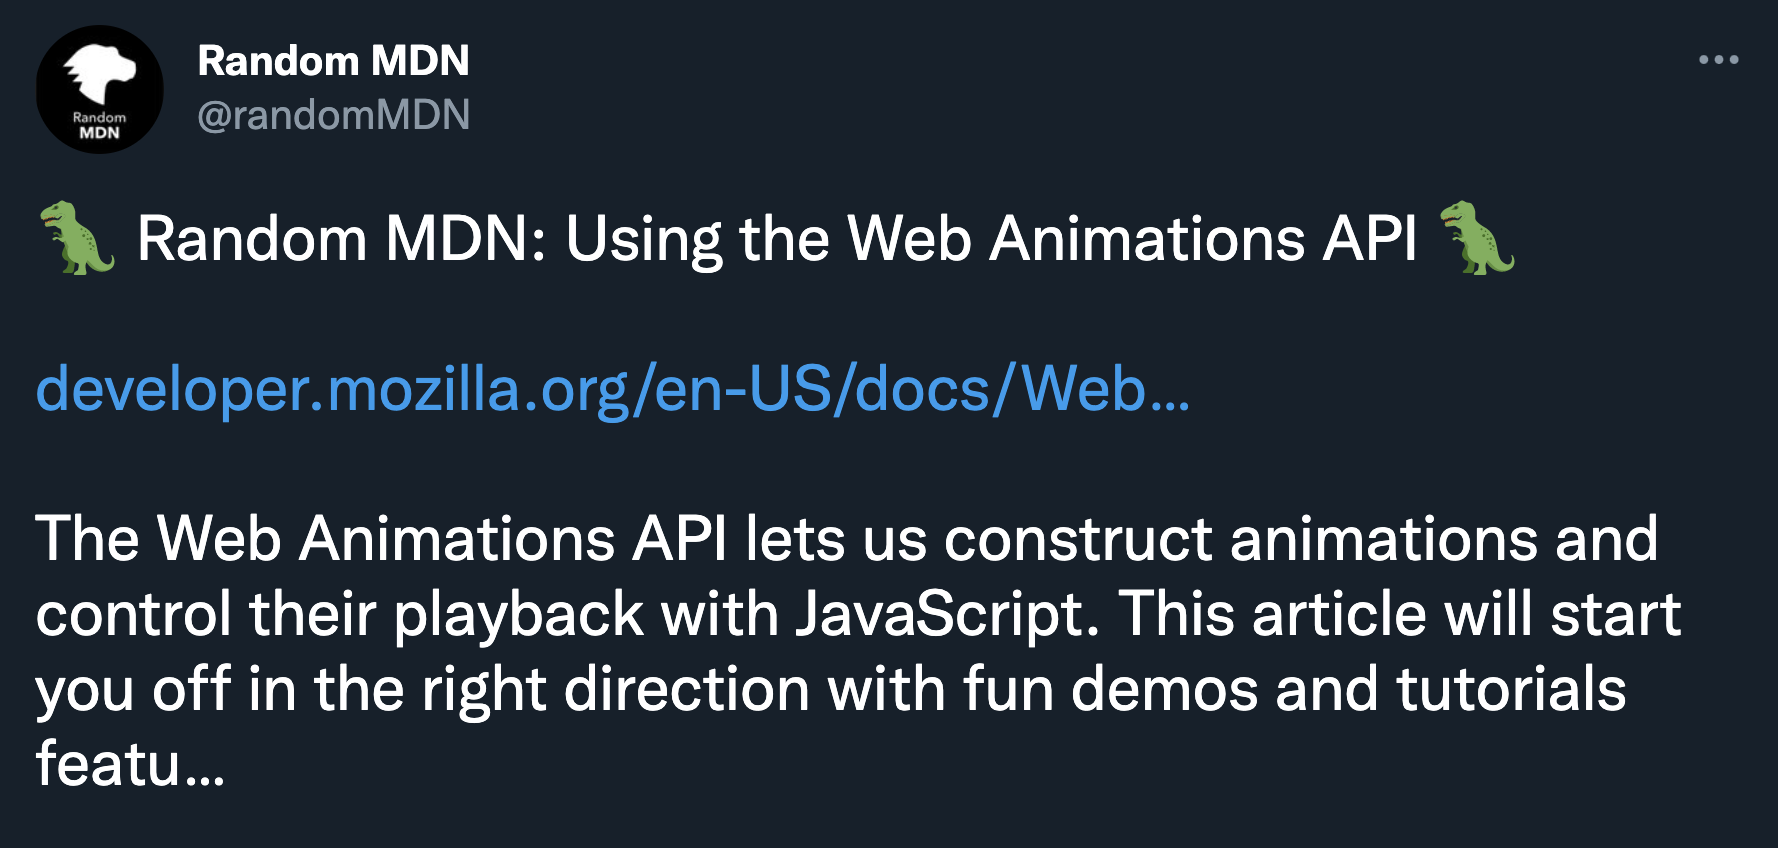 🦖 Random MDN: Using the Web Animations API 🦖  https://developer.mozilla.org/en-US/docs/Web/API/Web_Animations_API/Using_the_Web_Animations_API  The Web Animations API lets us construct animations and control their playback with JavaScript. This article will start you off in the right direction with fun demos and tutorials featu…